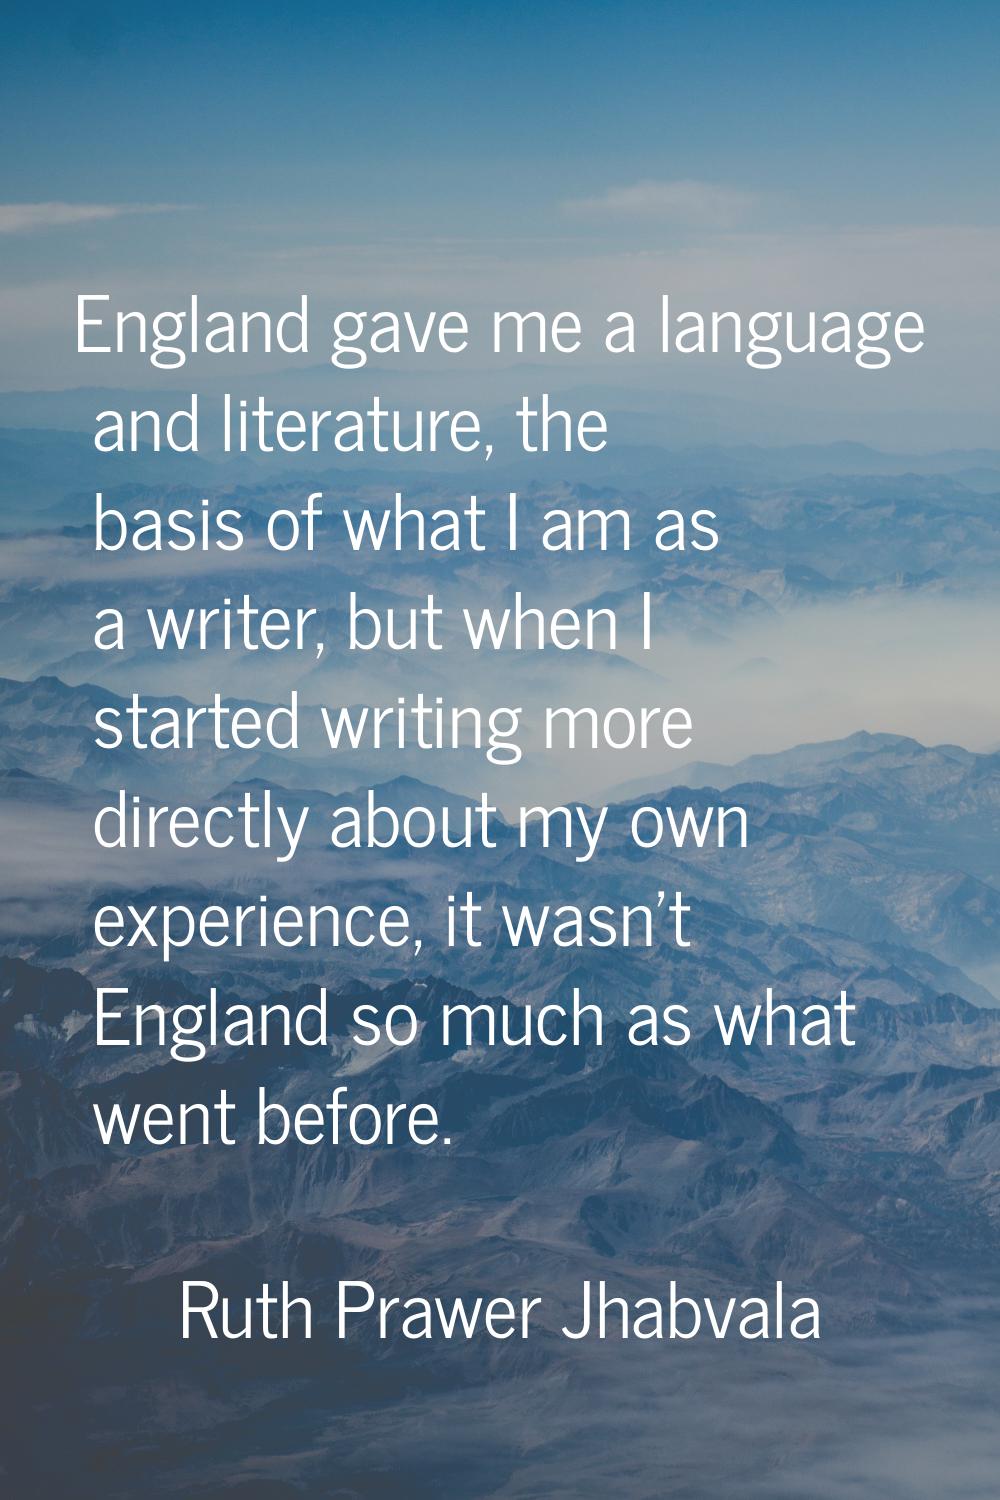 England gave me a language and literature, the basis of what I am as a writer, but when I started w